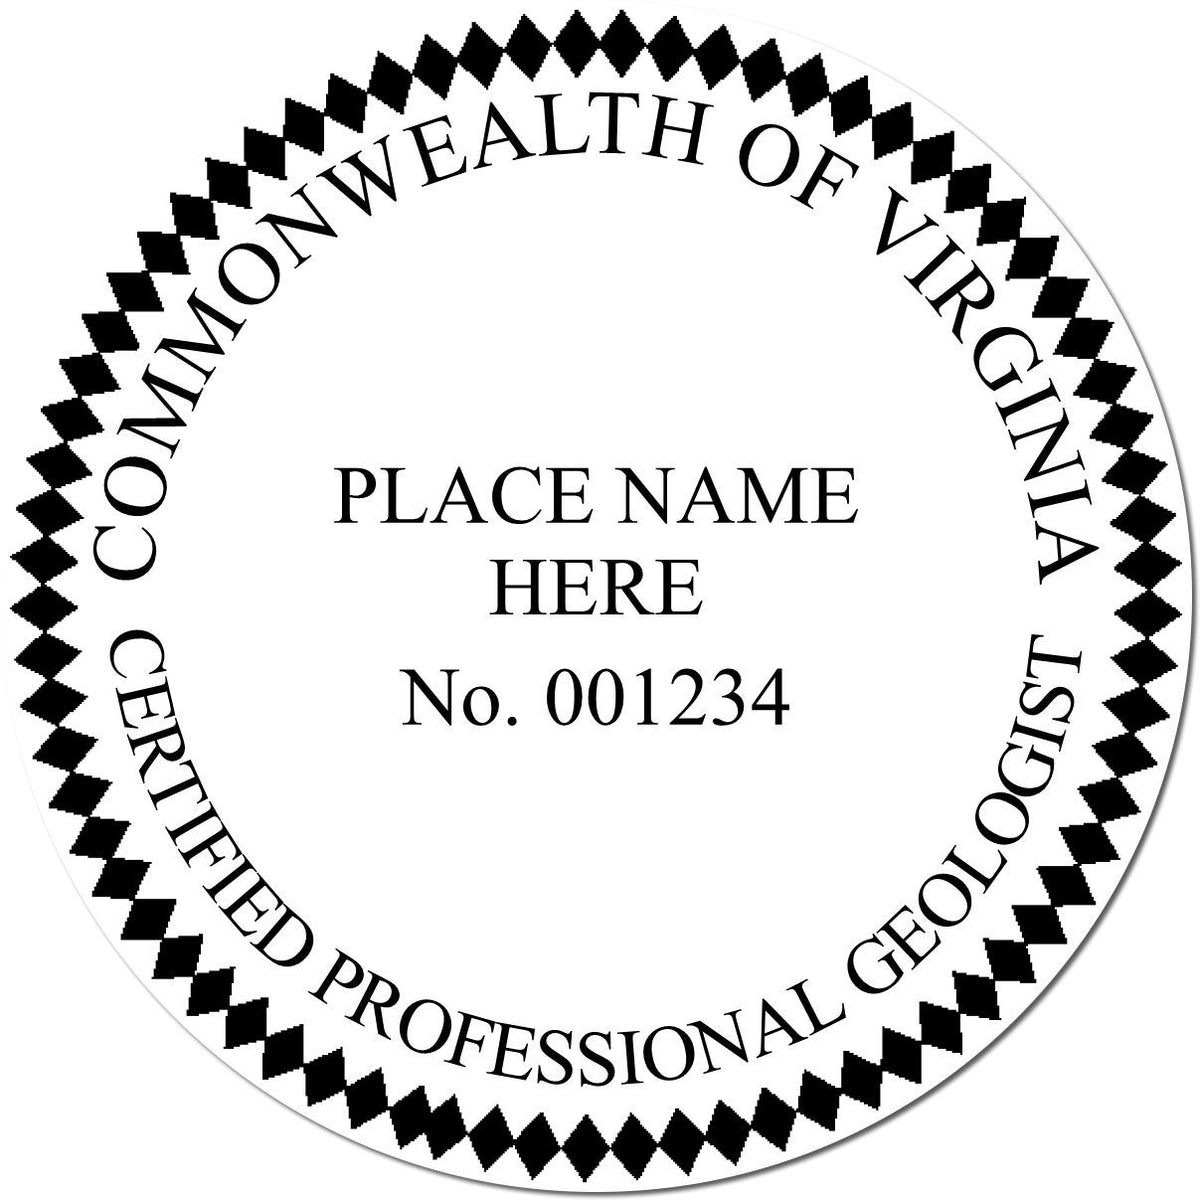 This paper is stamped with a sample imprint of the Virginia Professional Geologist Seal Stamp, signifying its quality and reliability.